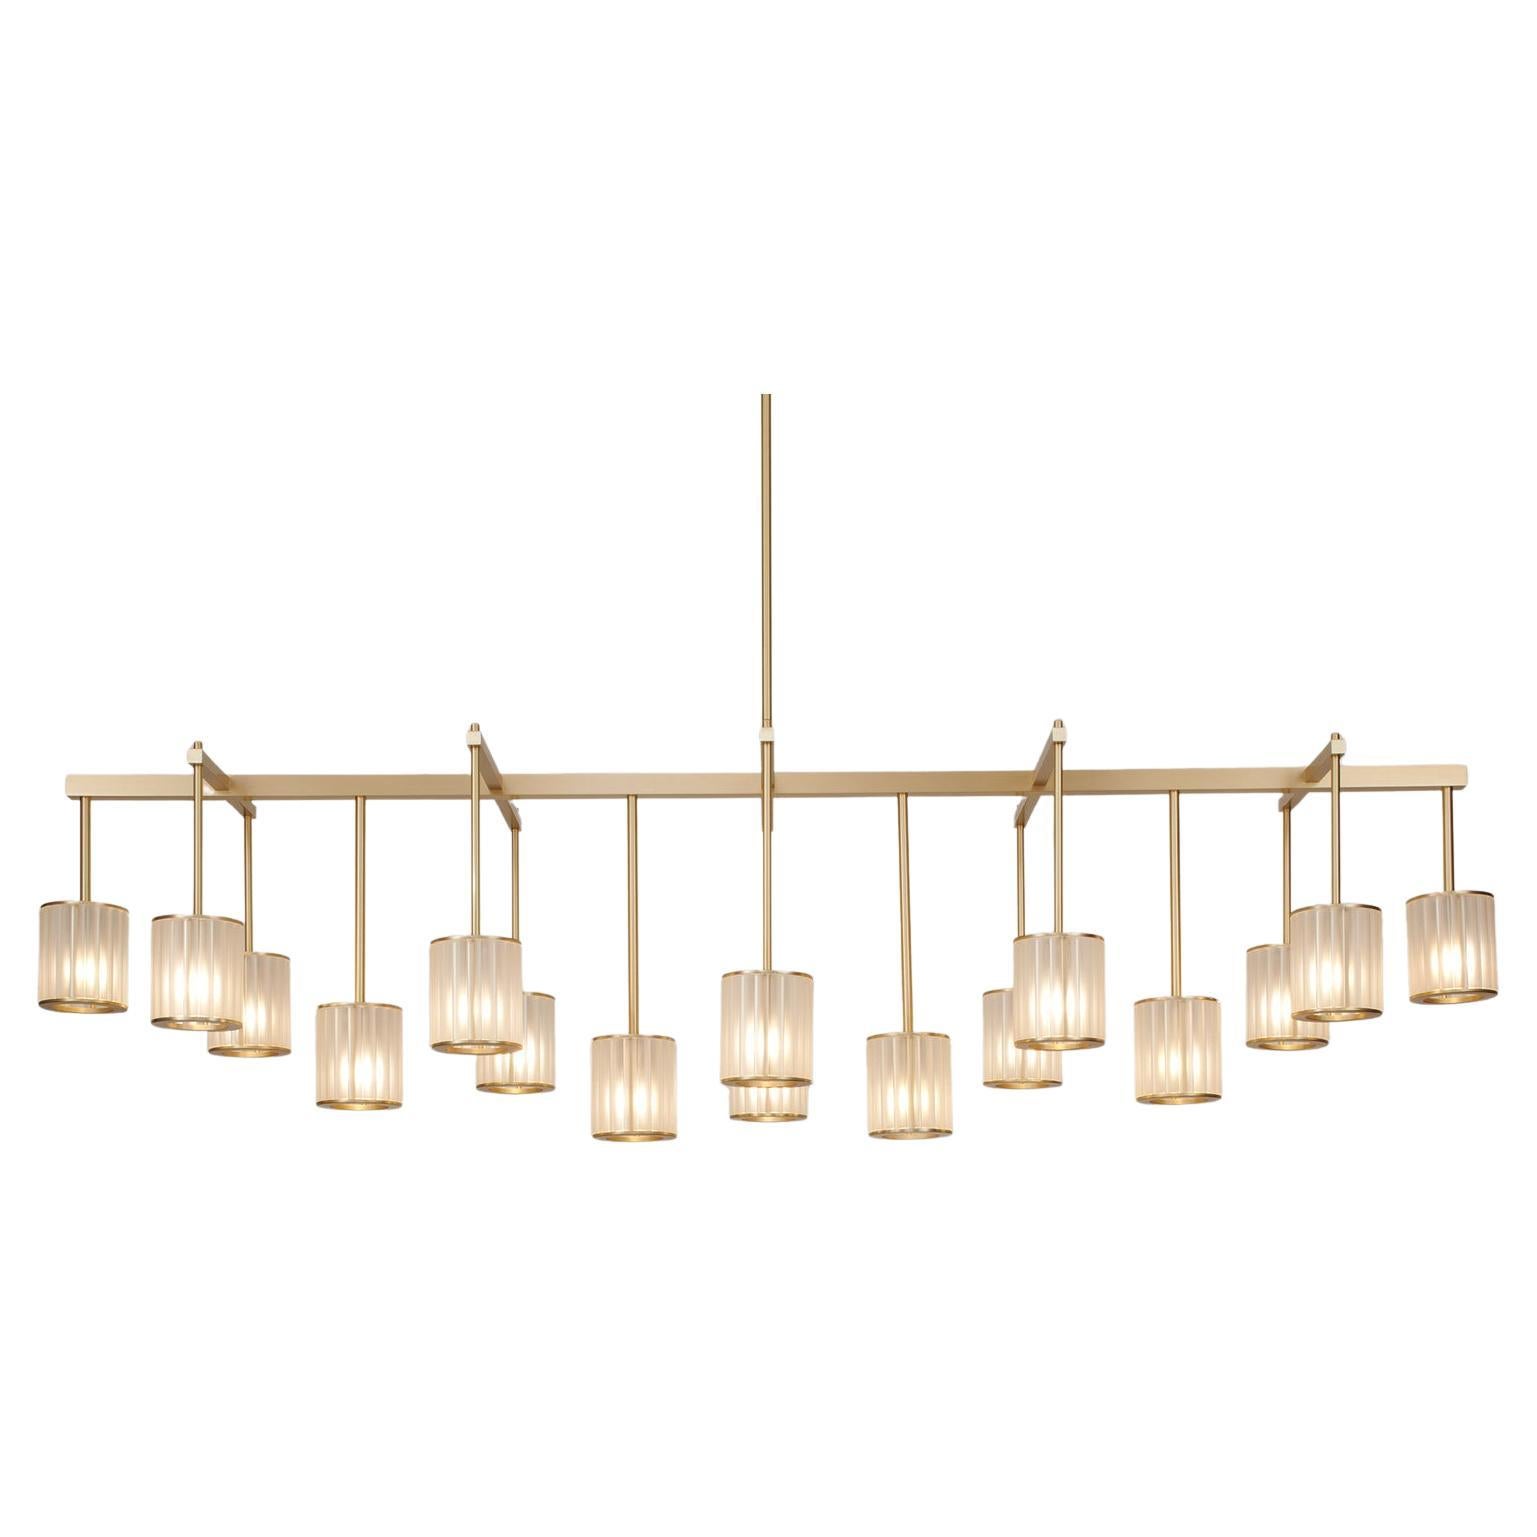 Flute Beam Chandelier with 16 Arms in Brushed Brass and Frosted Glass Diffusers